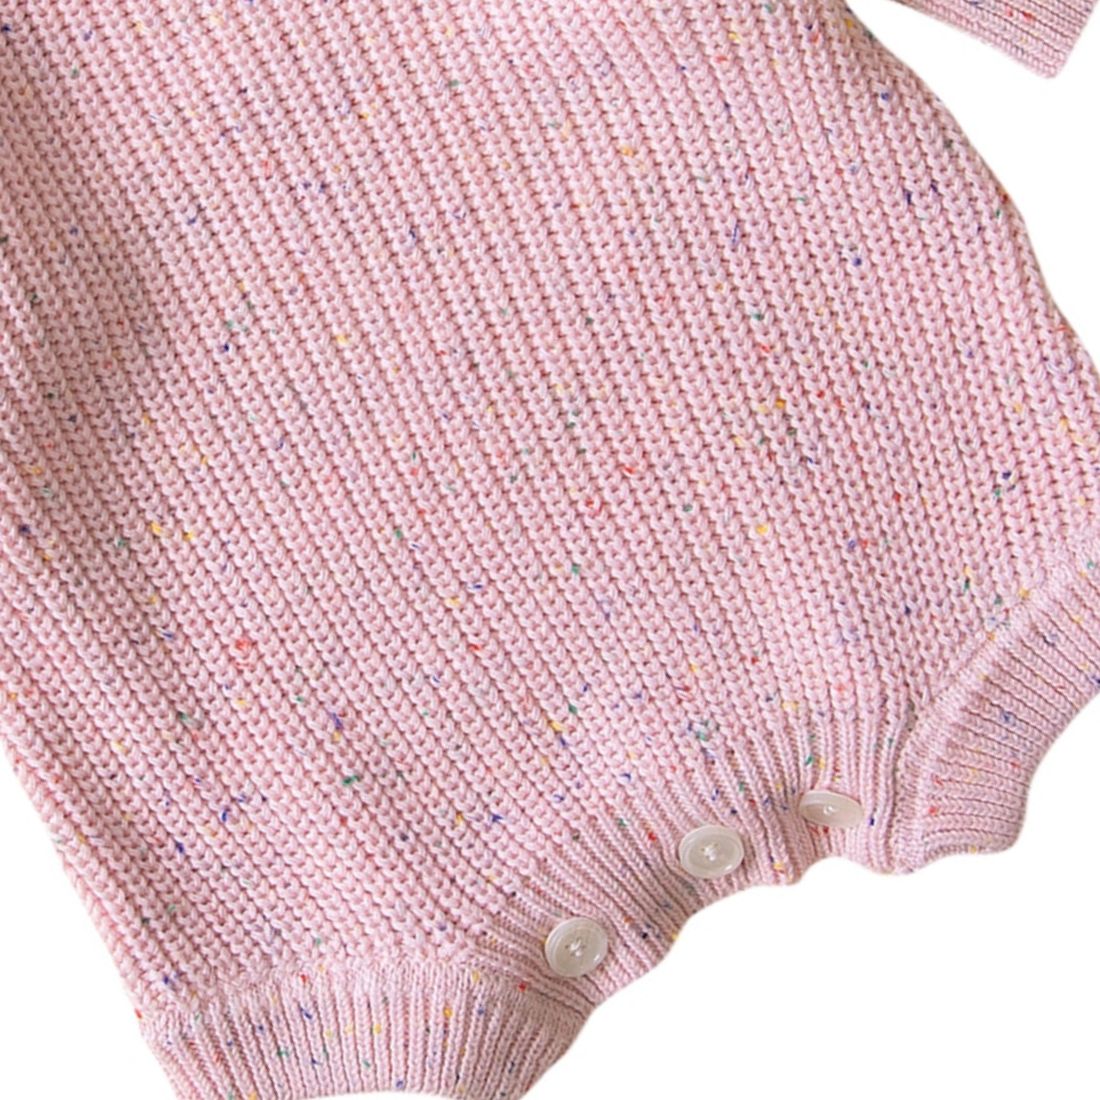 Up close of Pink Speckled Knit Baby Girl Bodysuit